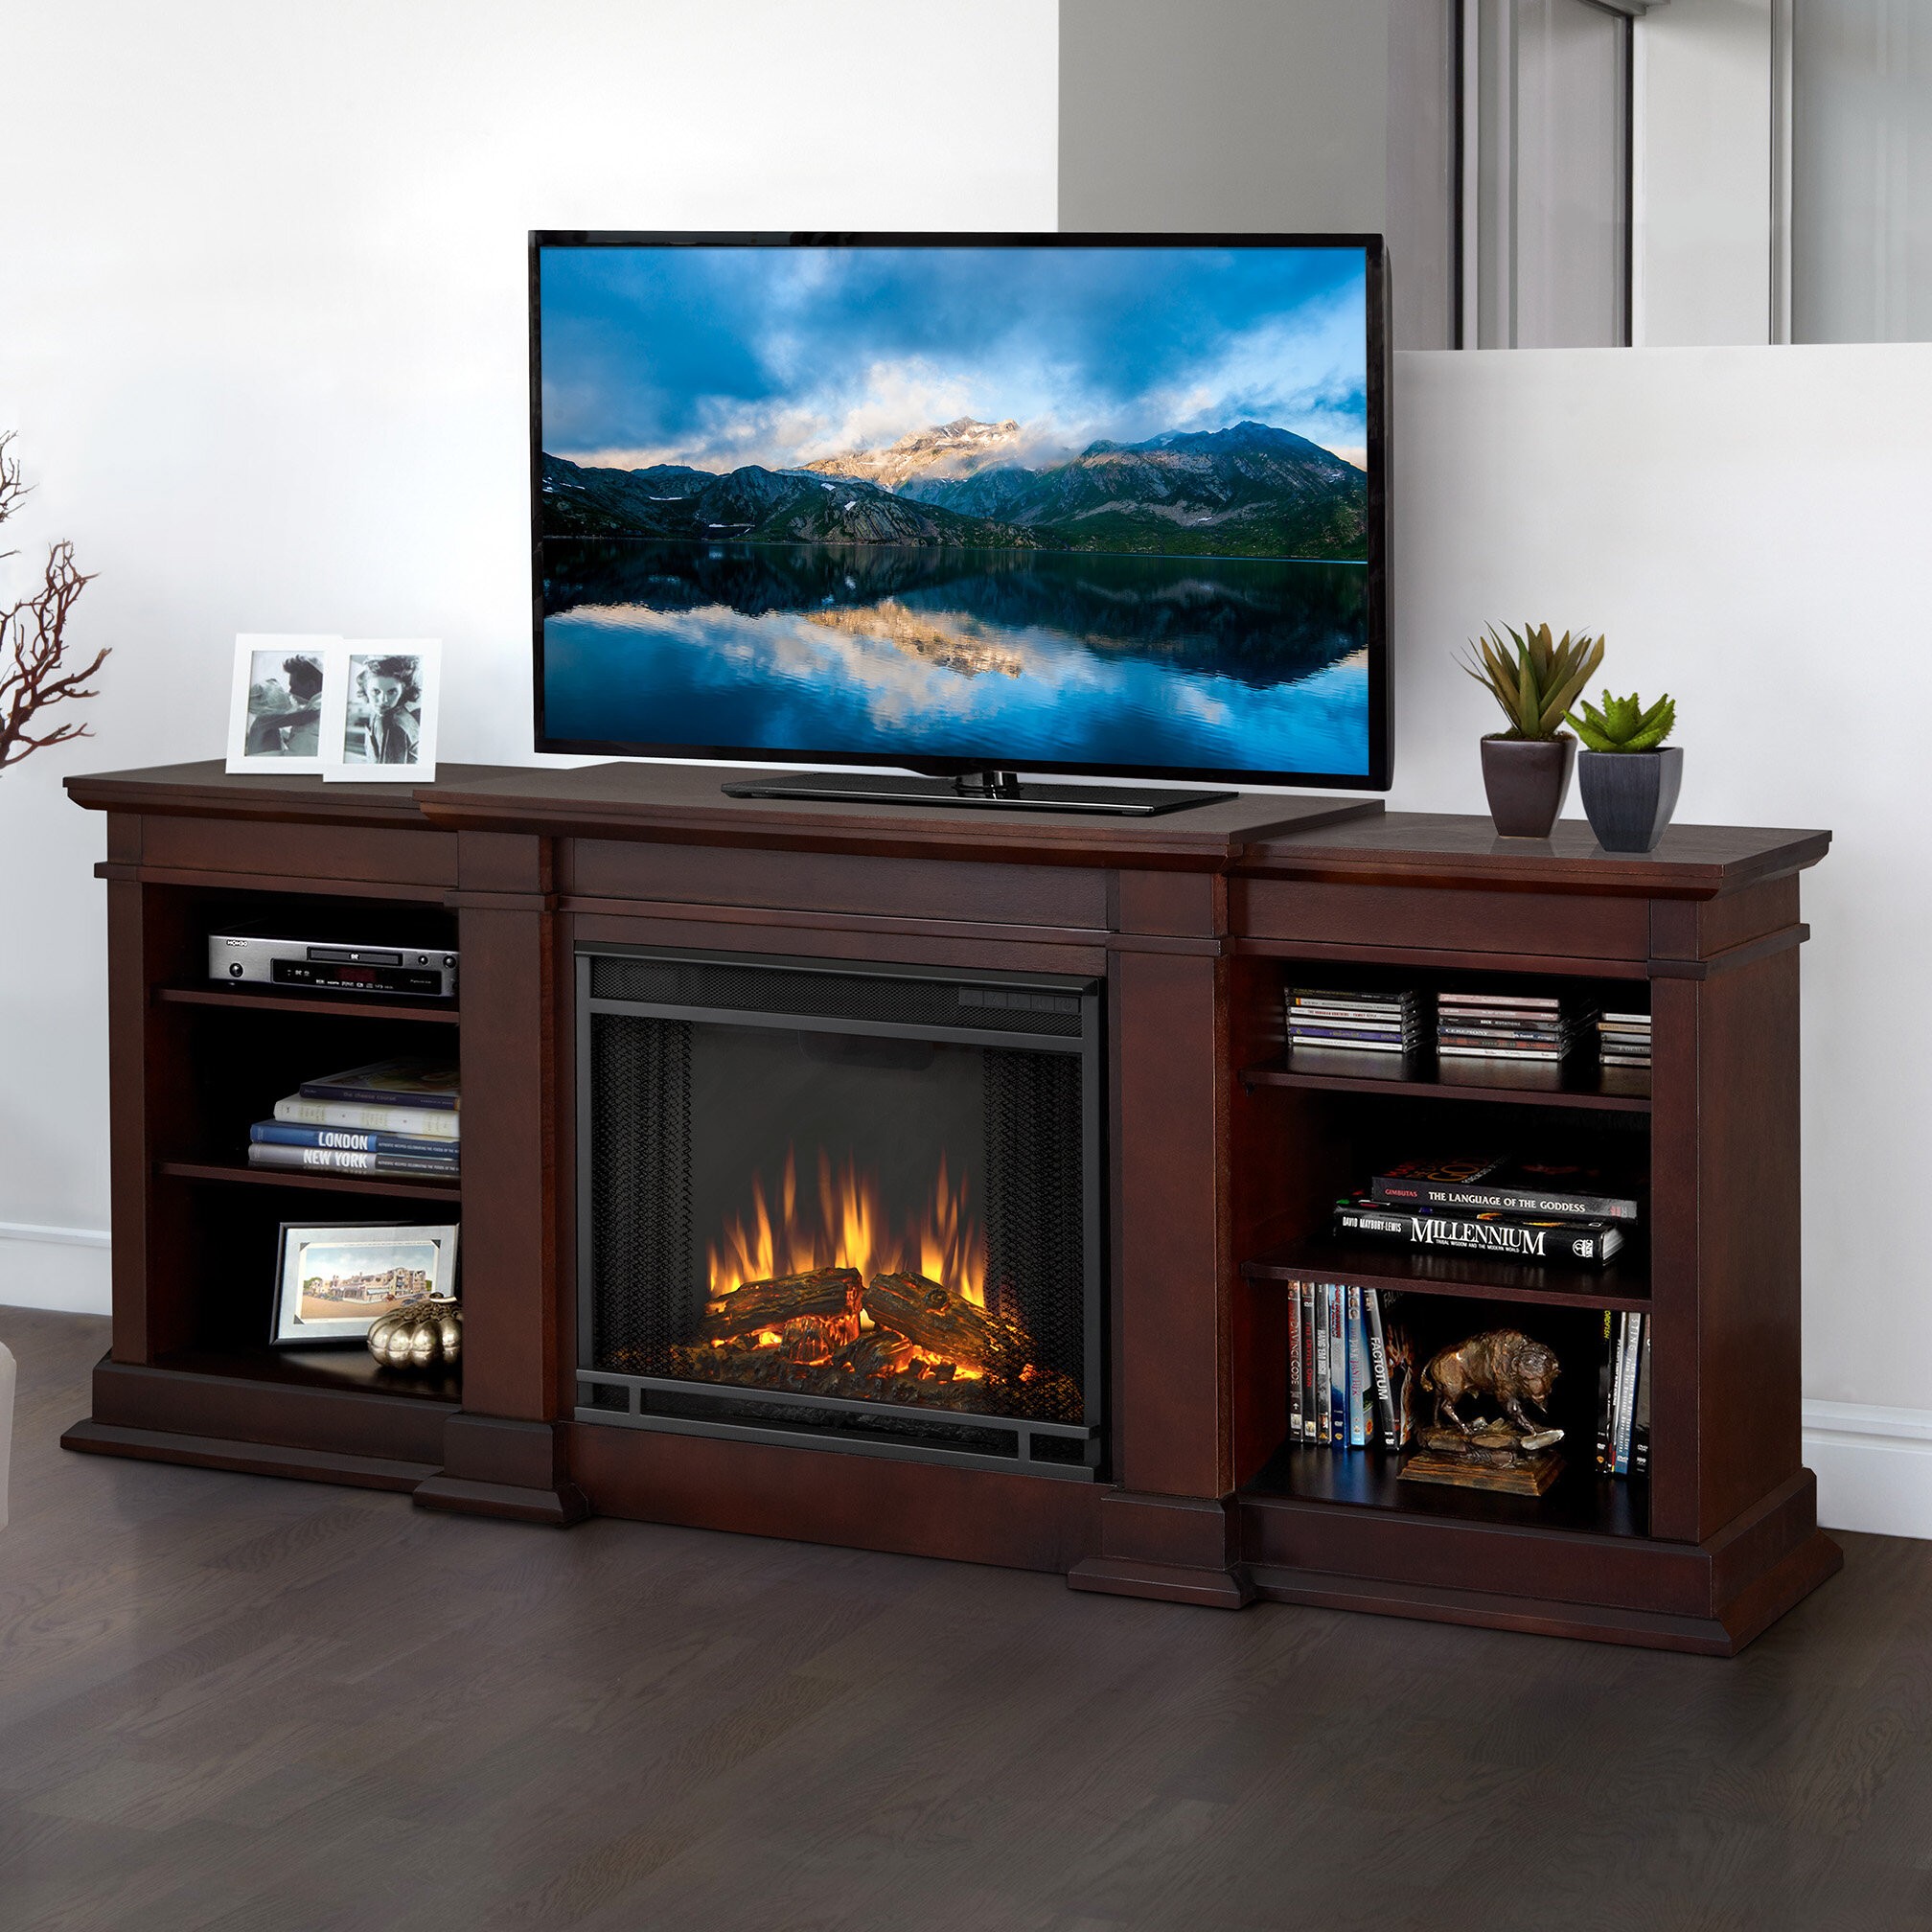 Fresno TV Stand for TVs up to 78" with Electric Fireplace Included